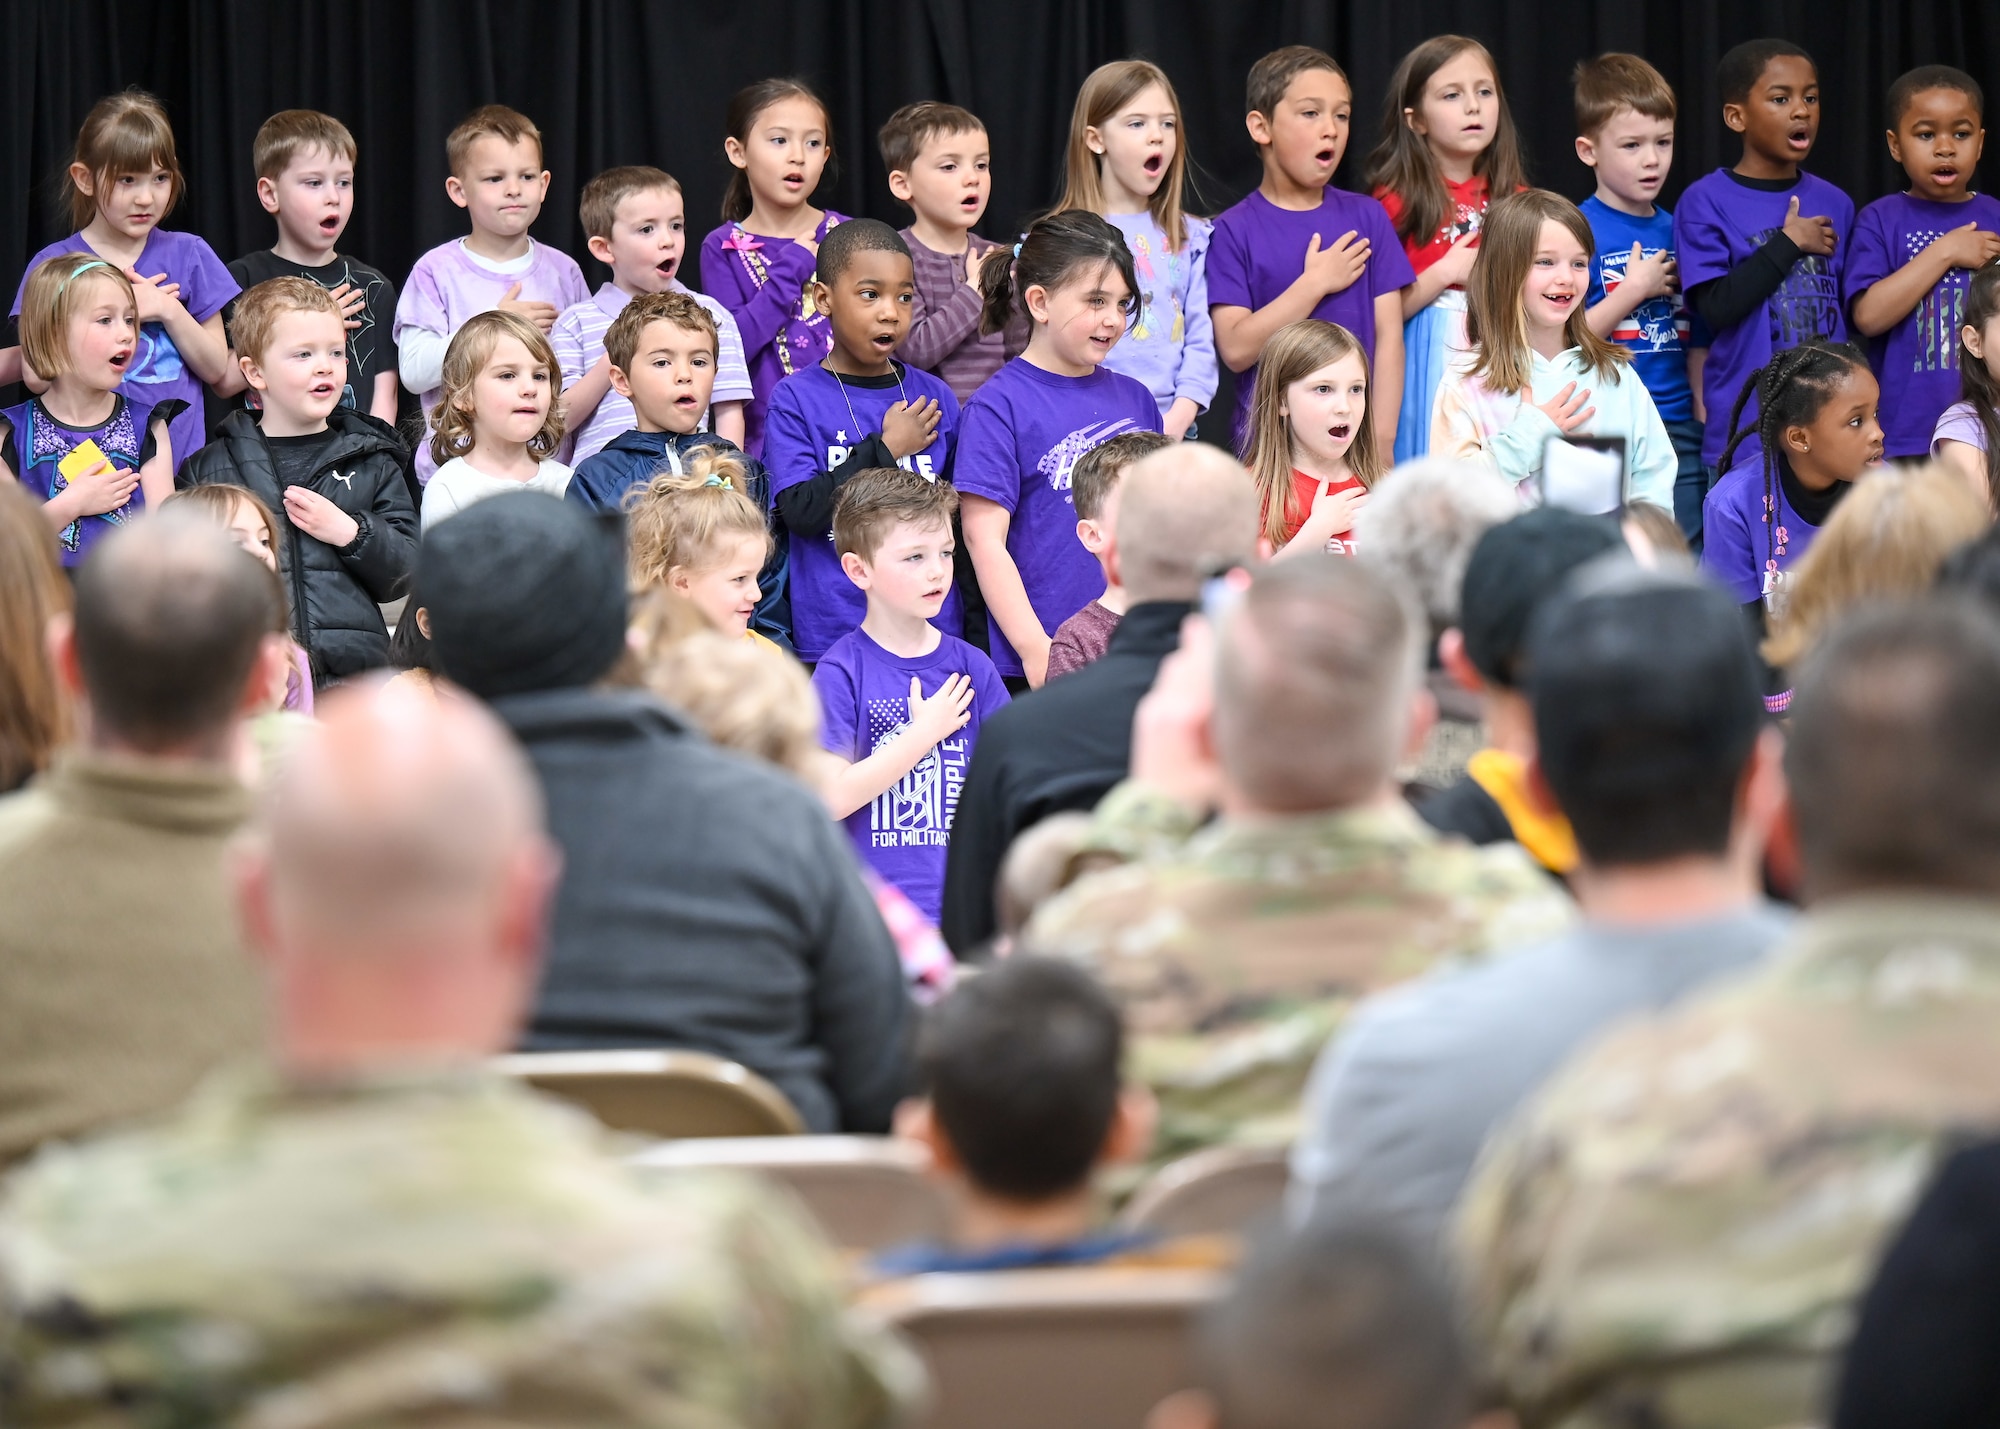 Students and faculty from Hill Field Elementary School in Clearfield, Utah, celebrated Month of the Military Child with performances and crafts